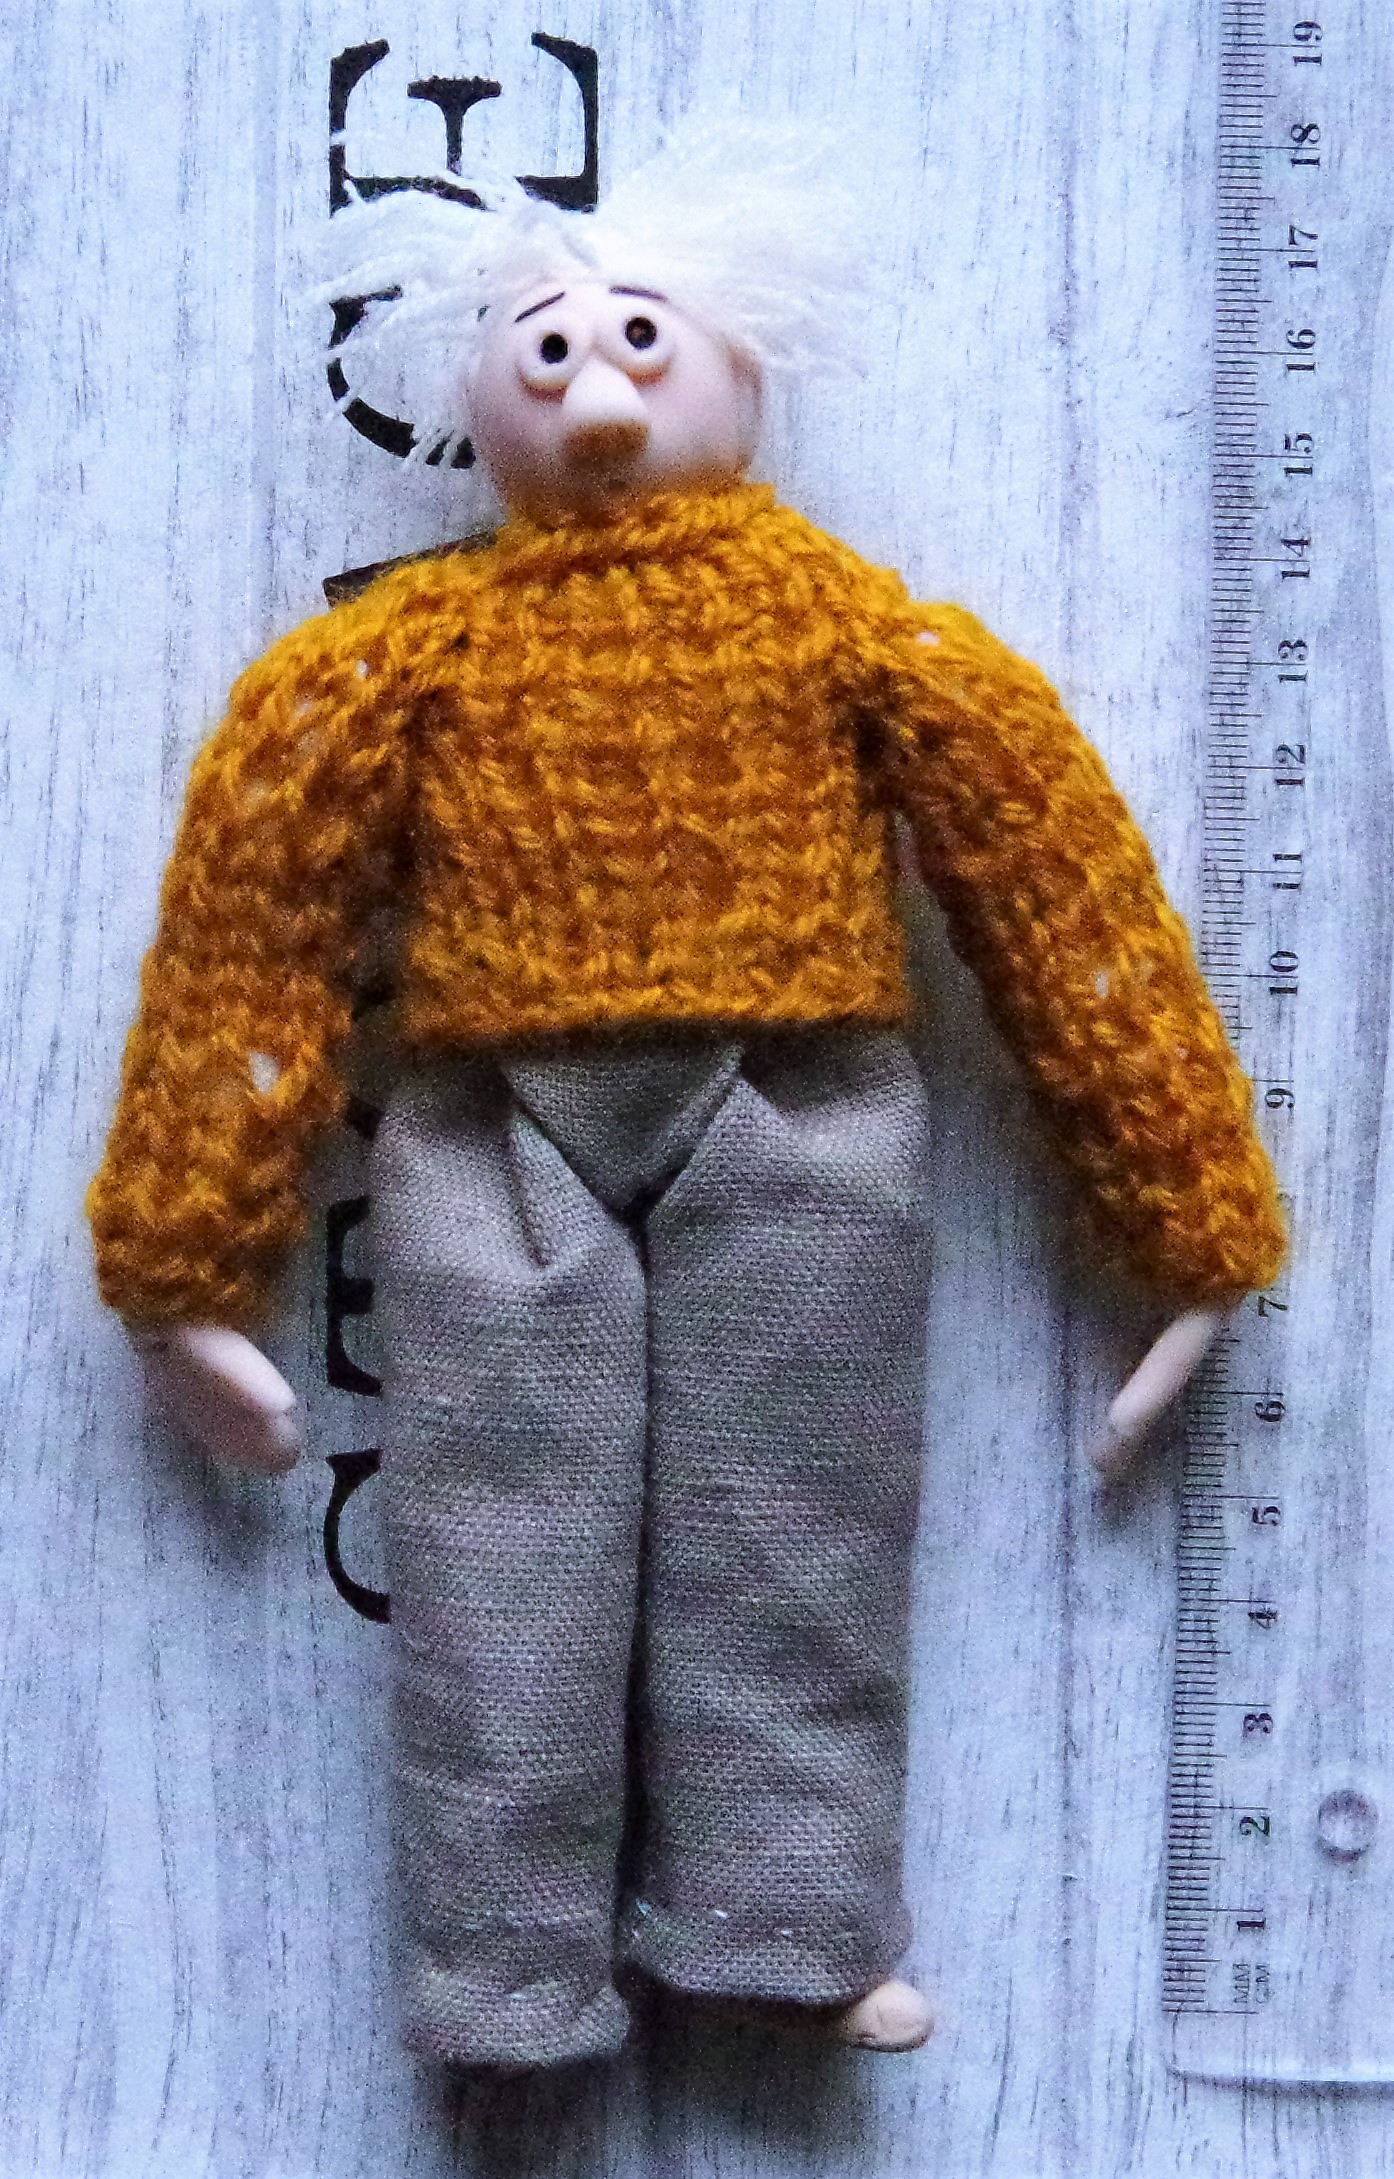 A rag doll. With a head, hands and shoes made of modelling clay.